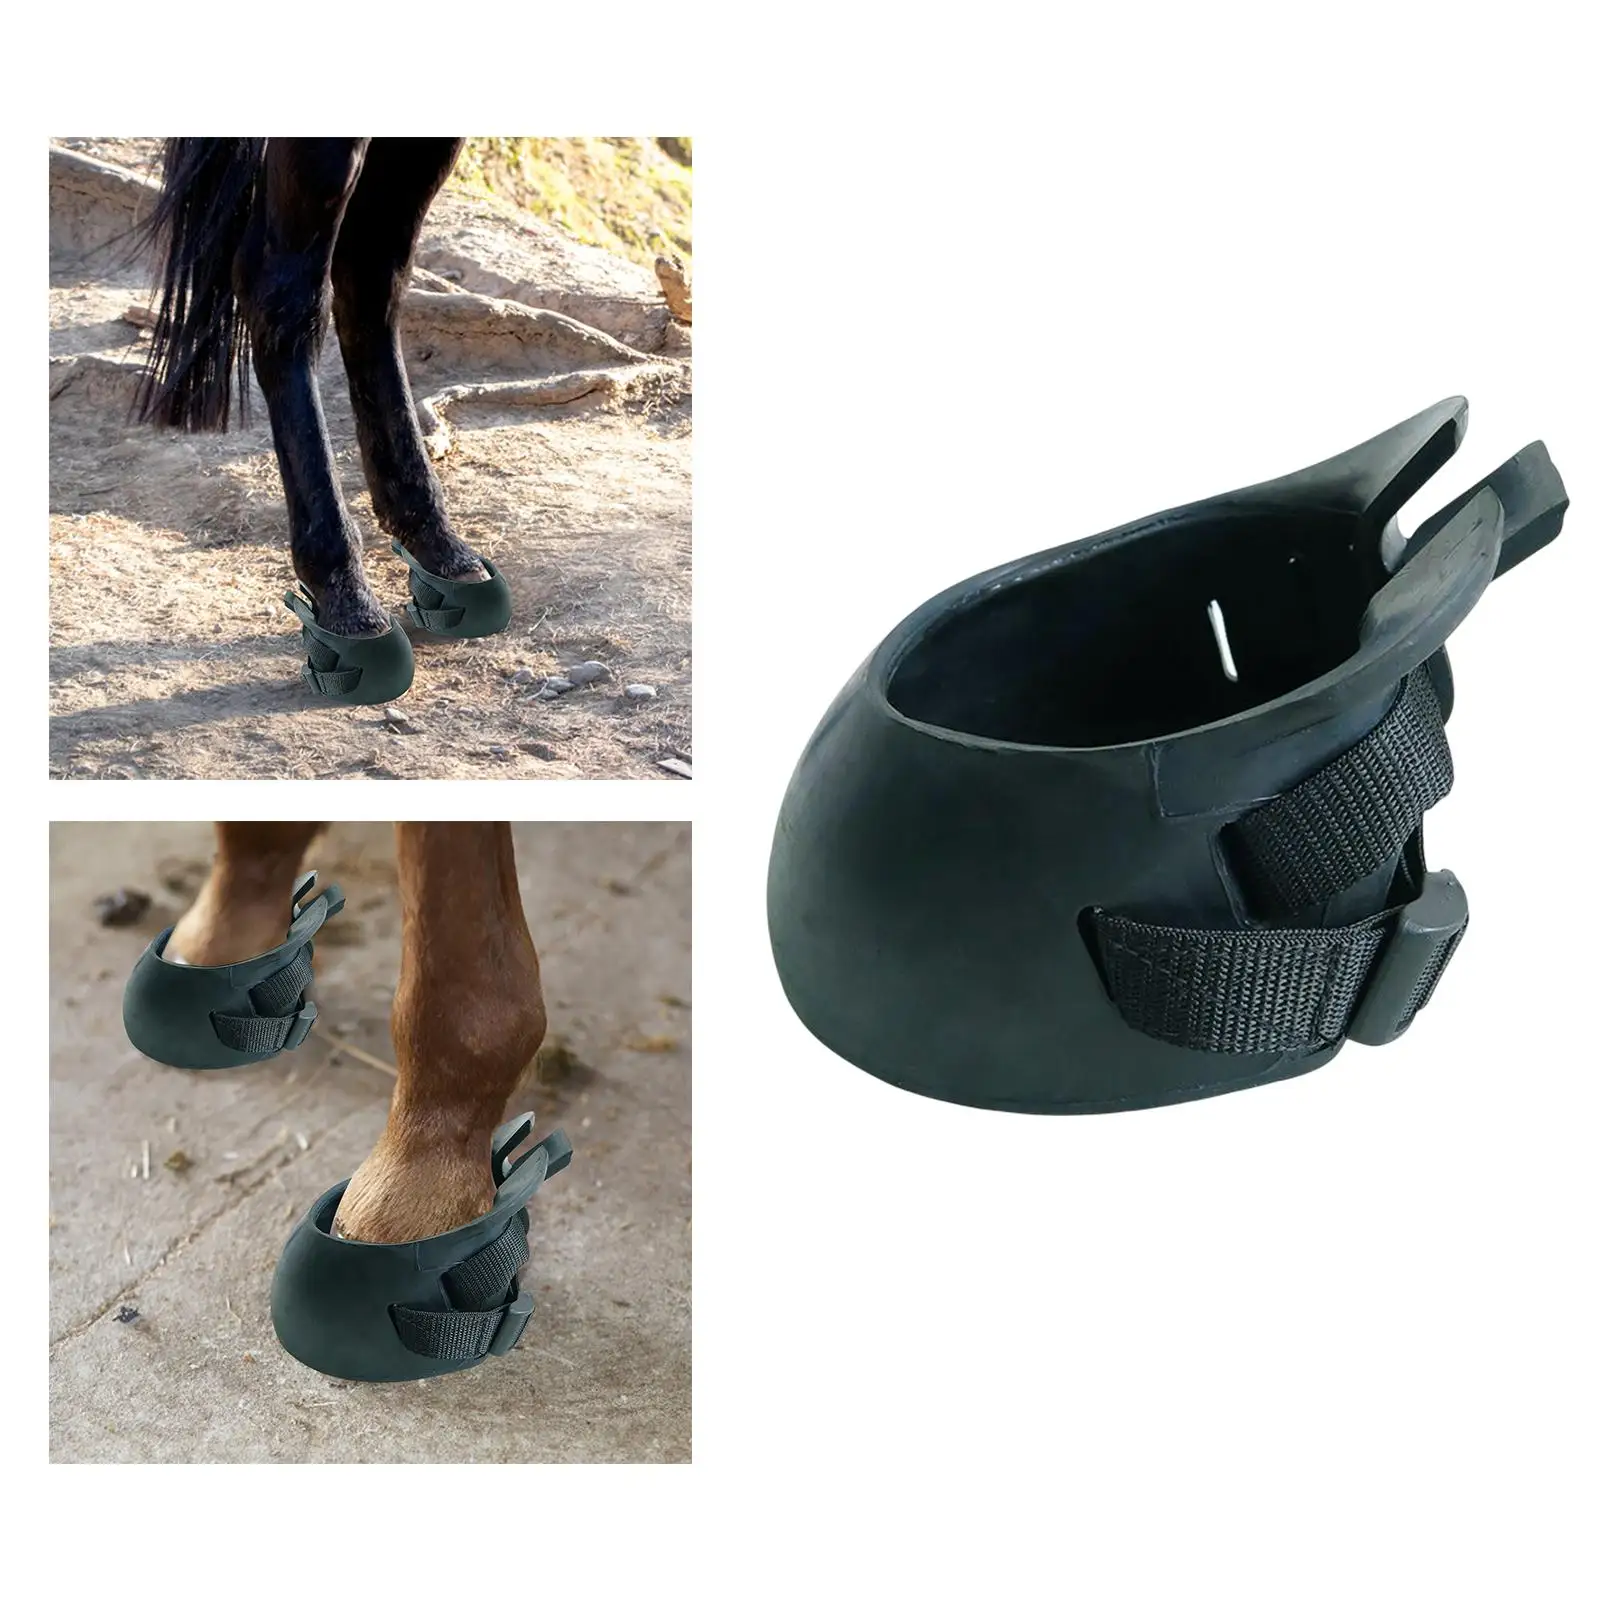 Horse Hoof Boot, Hoof Protection Boot Isolate Dirty Water, Portable Sturdy Nonslip Foot Guard, Hoof Saver Boot